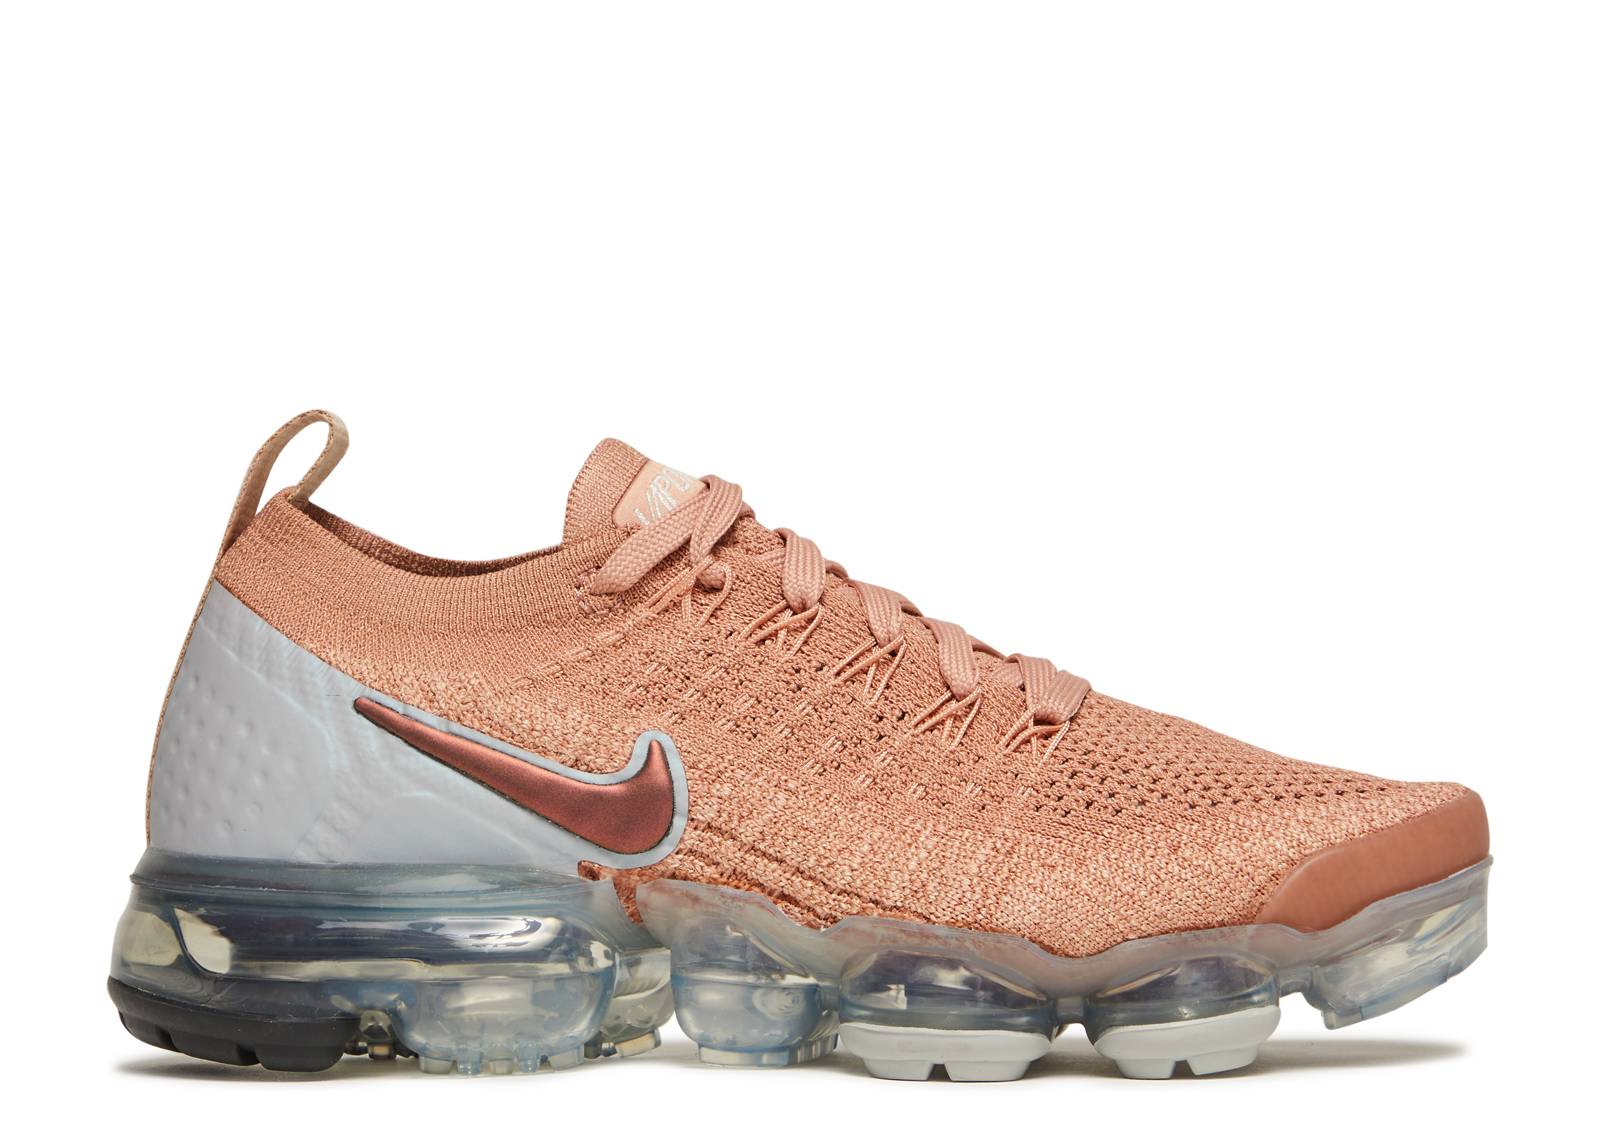 Wmns Air VaporMax Flyknit 2 'Rose Gold'Color:Pink,Size:5